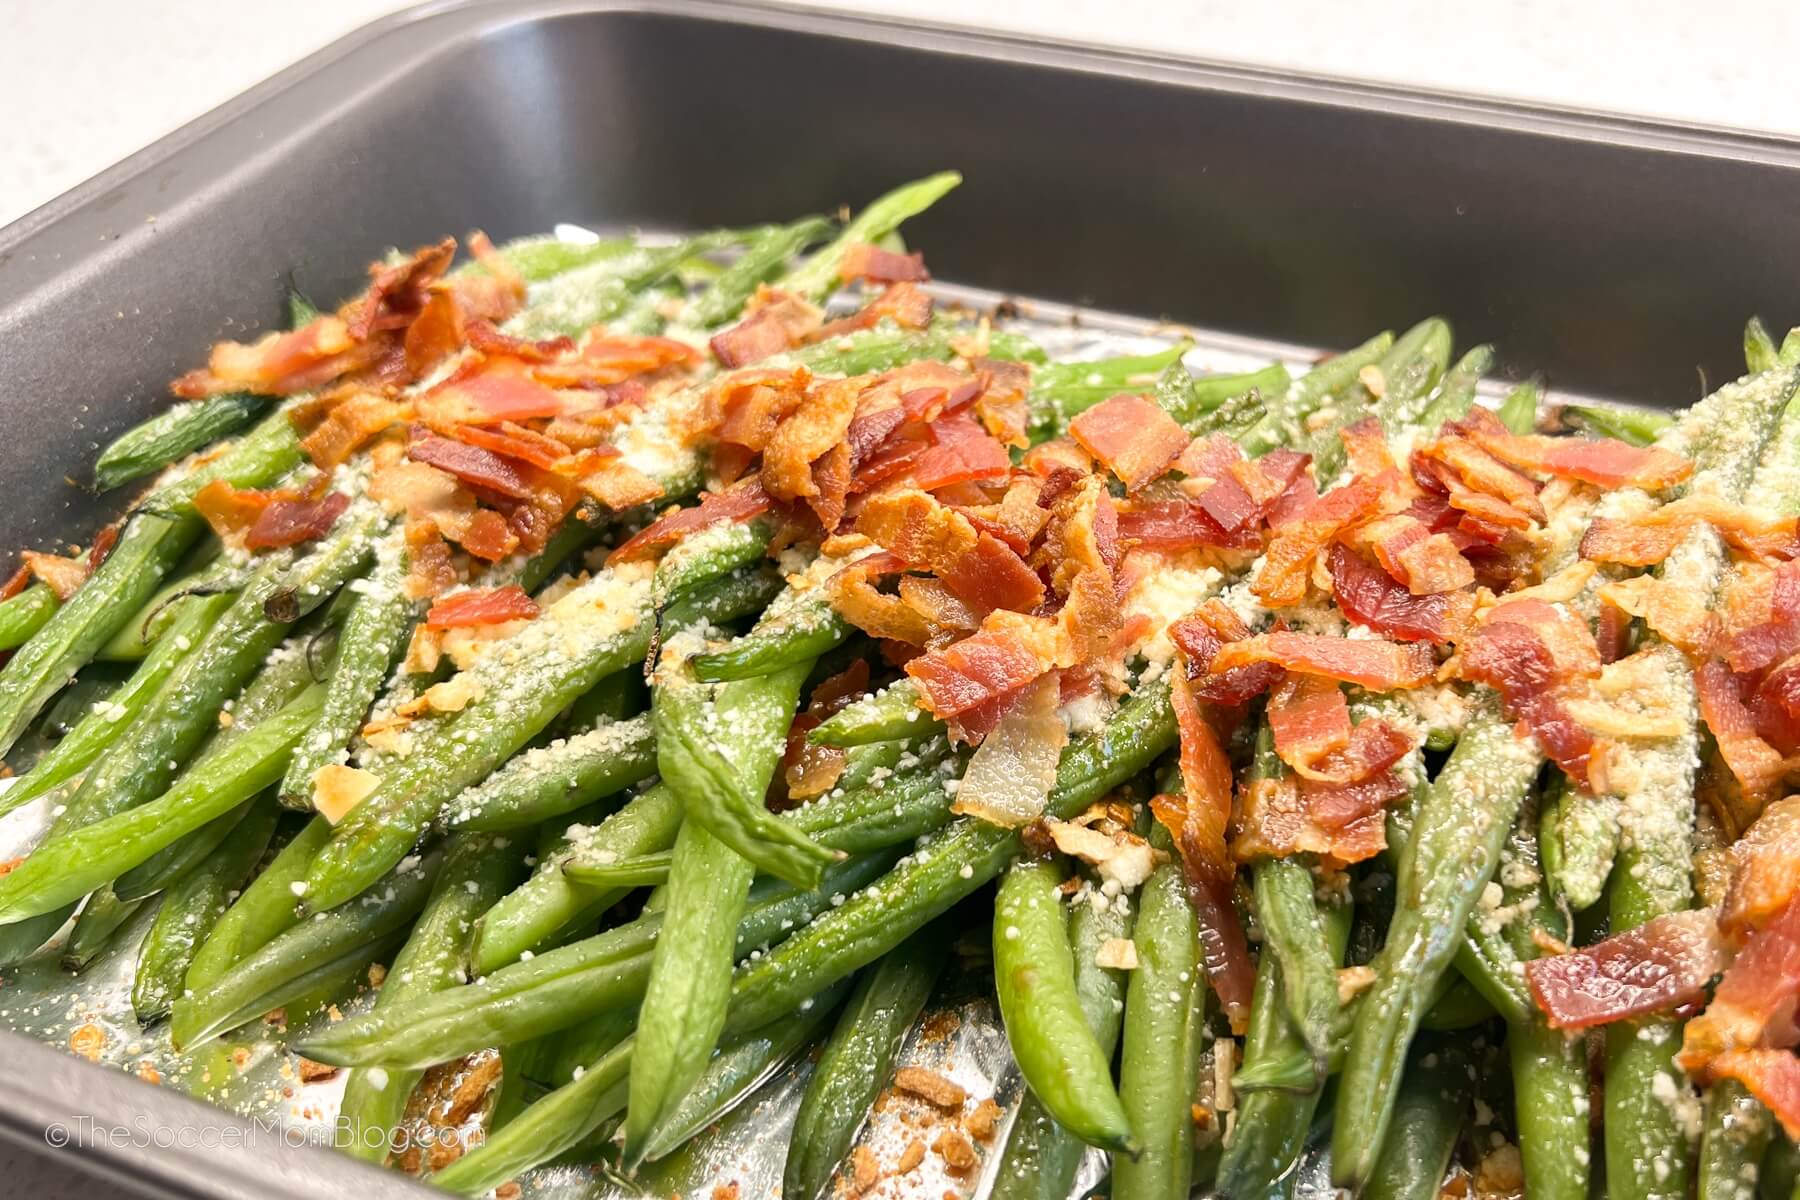 Parmesan Roasted Green Beans with Bacon - The Soccer Mom Blog